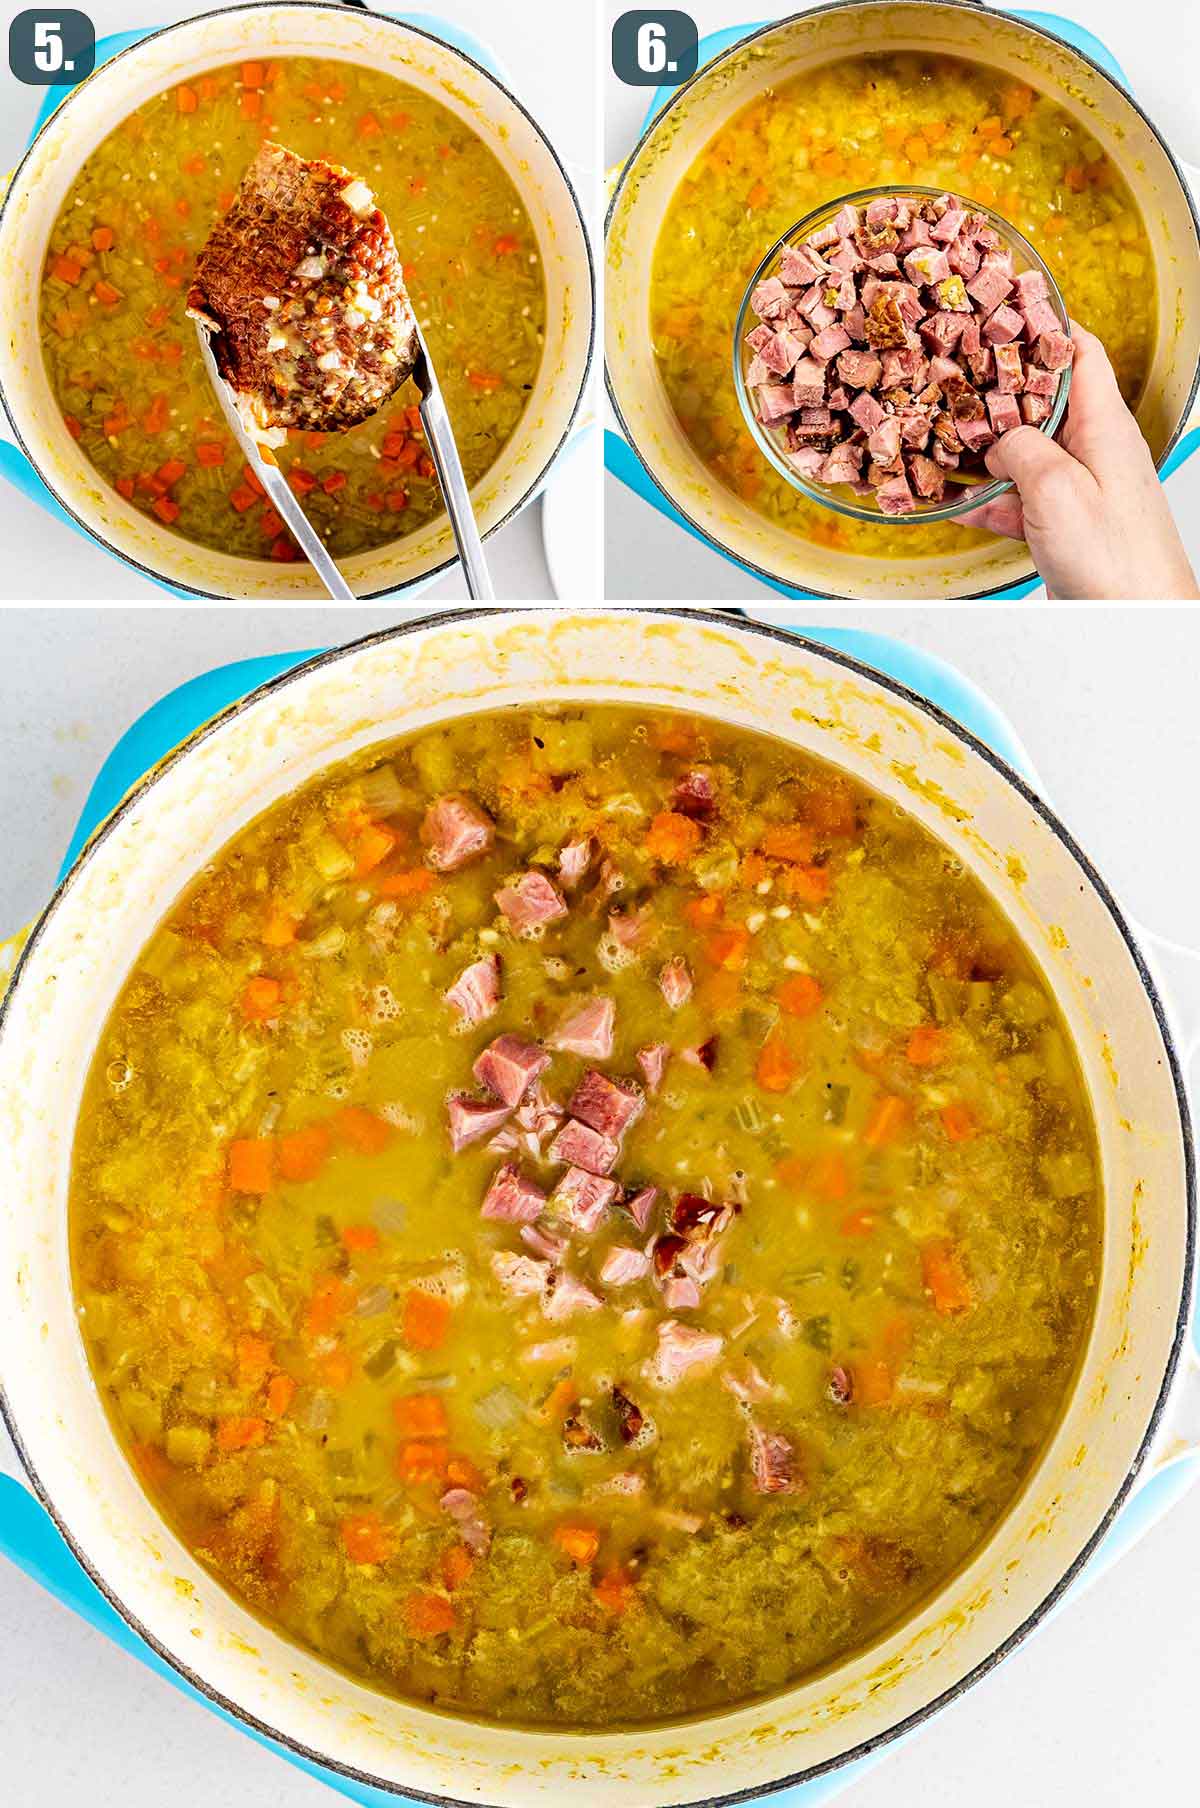 process shots showing how to finish making split pea soup.